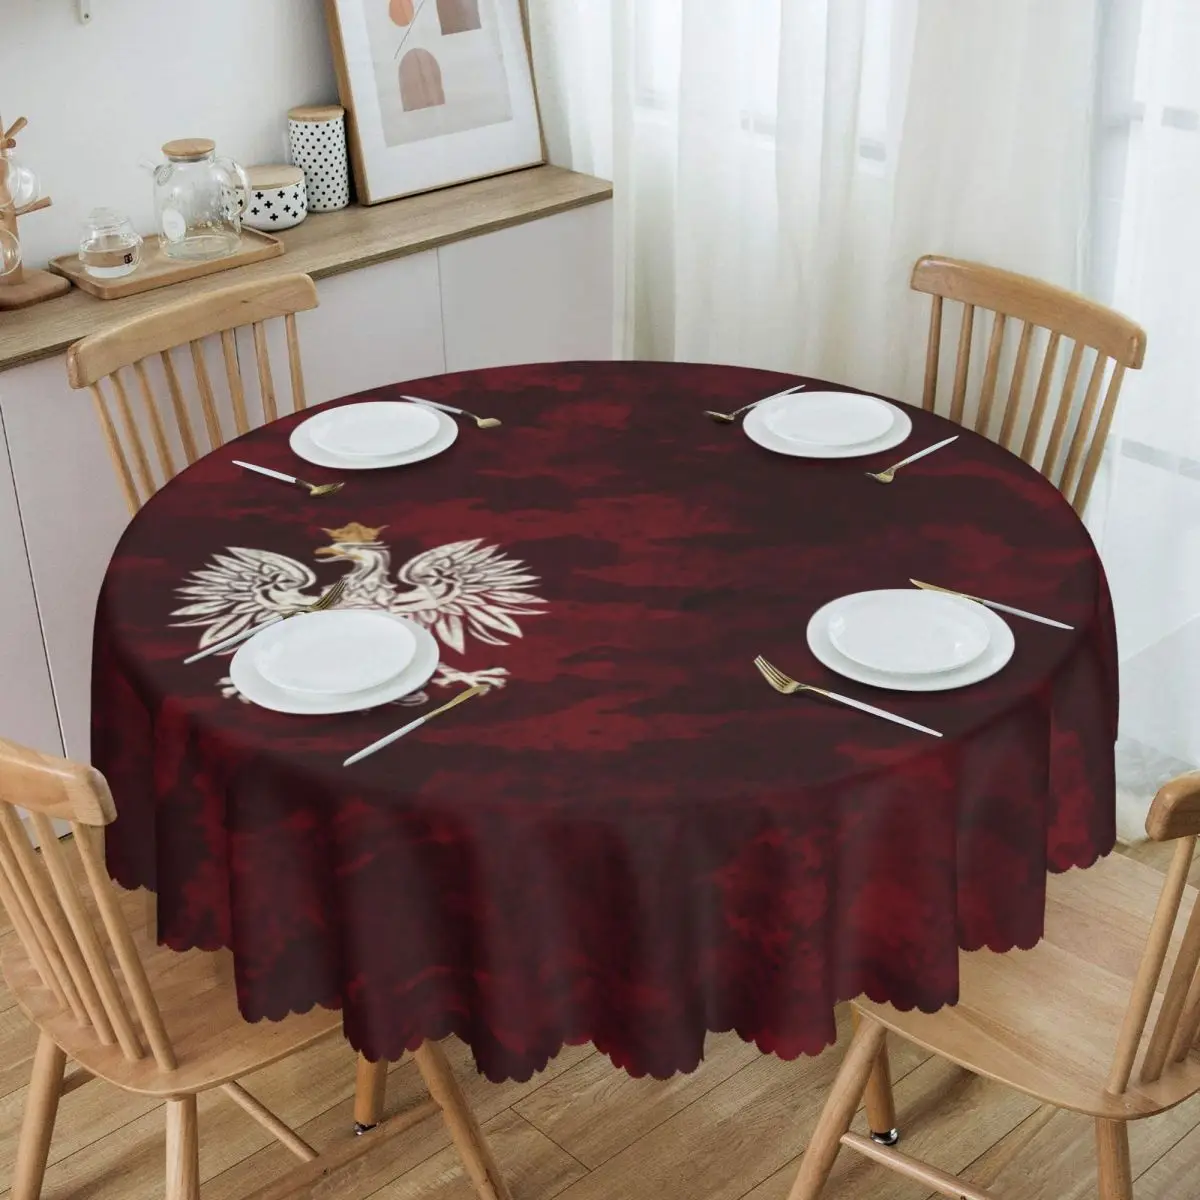 

Poland Vintage Coat Of Arms Tablecloth Round Waterproof Polska Polish Eagle Table Cloth Cover for Banquet 60 inches